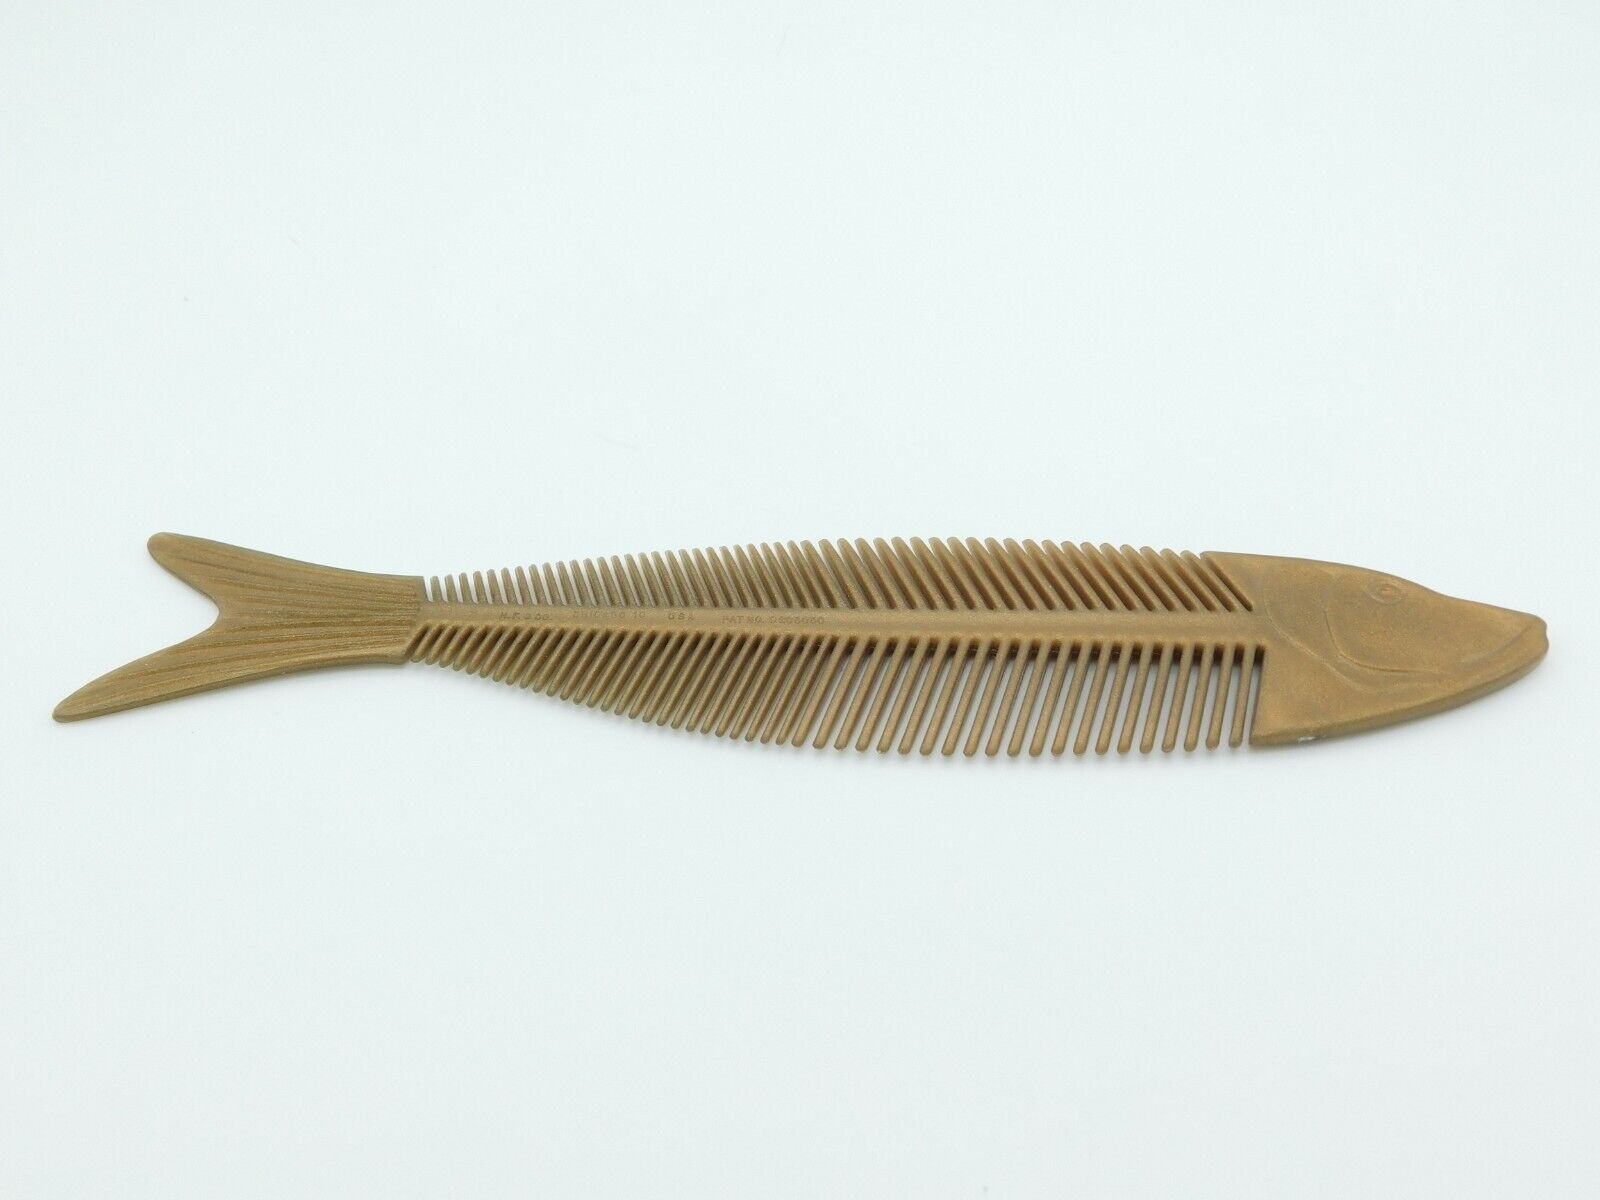 Vintage H-F & Co. Fish Bone Novelty Comb Gold Color 1964 Made in Chicago USA